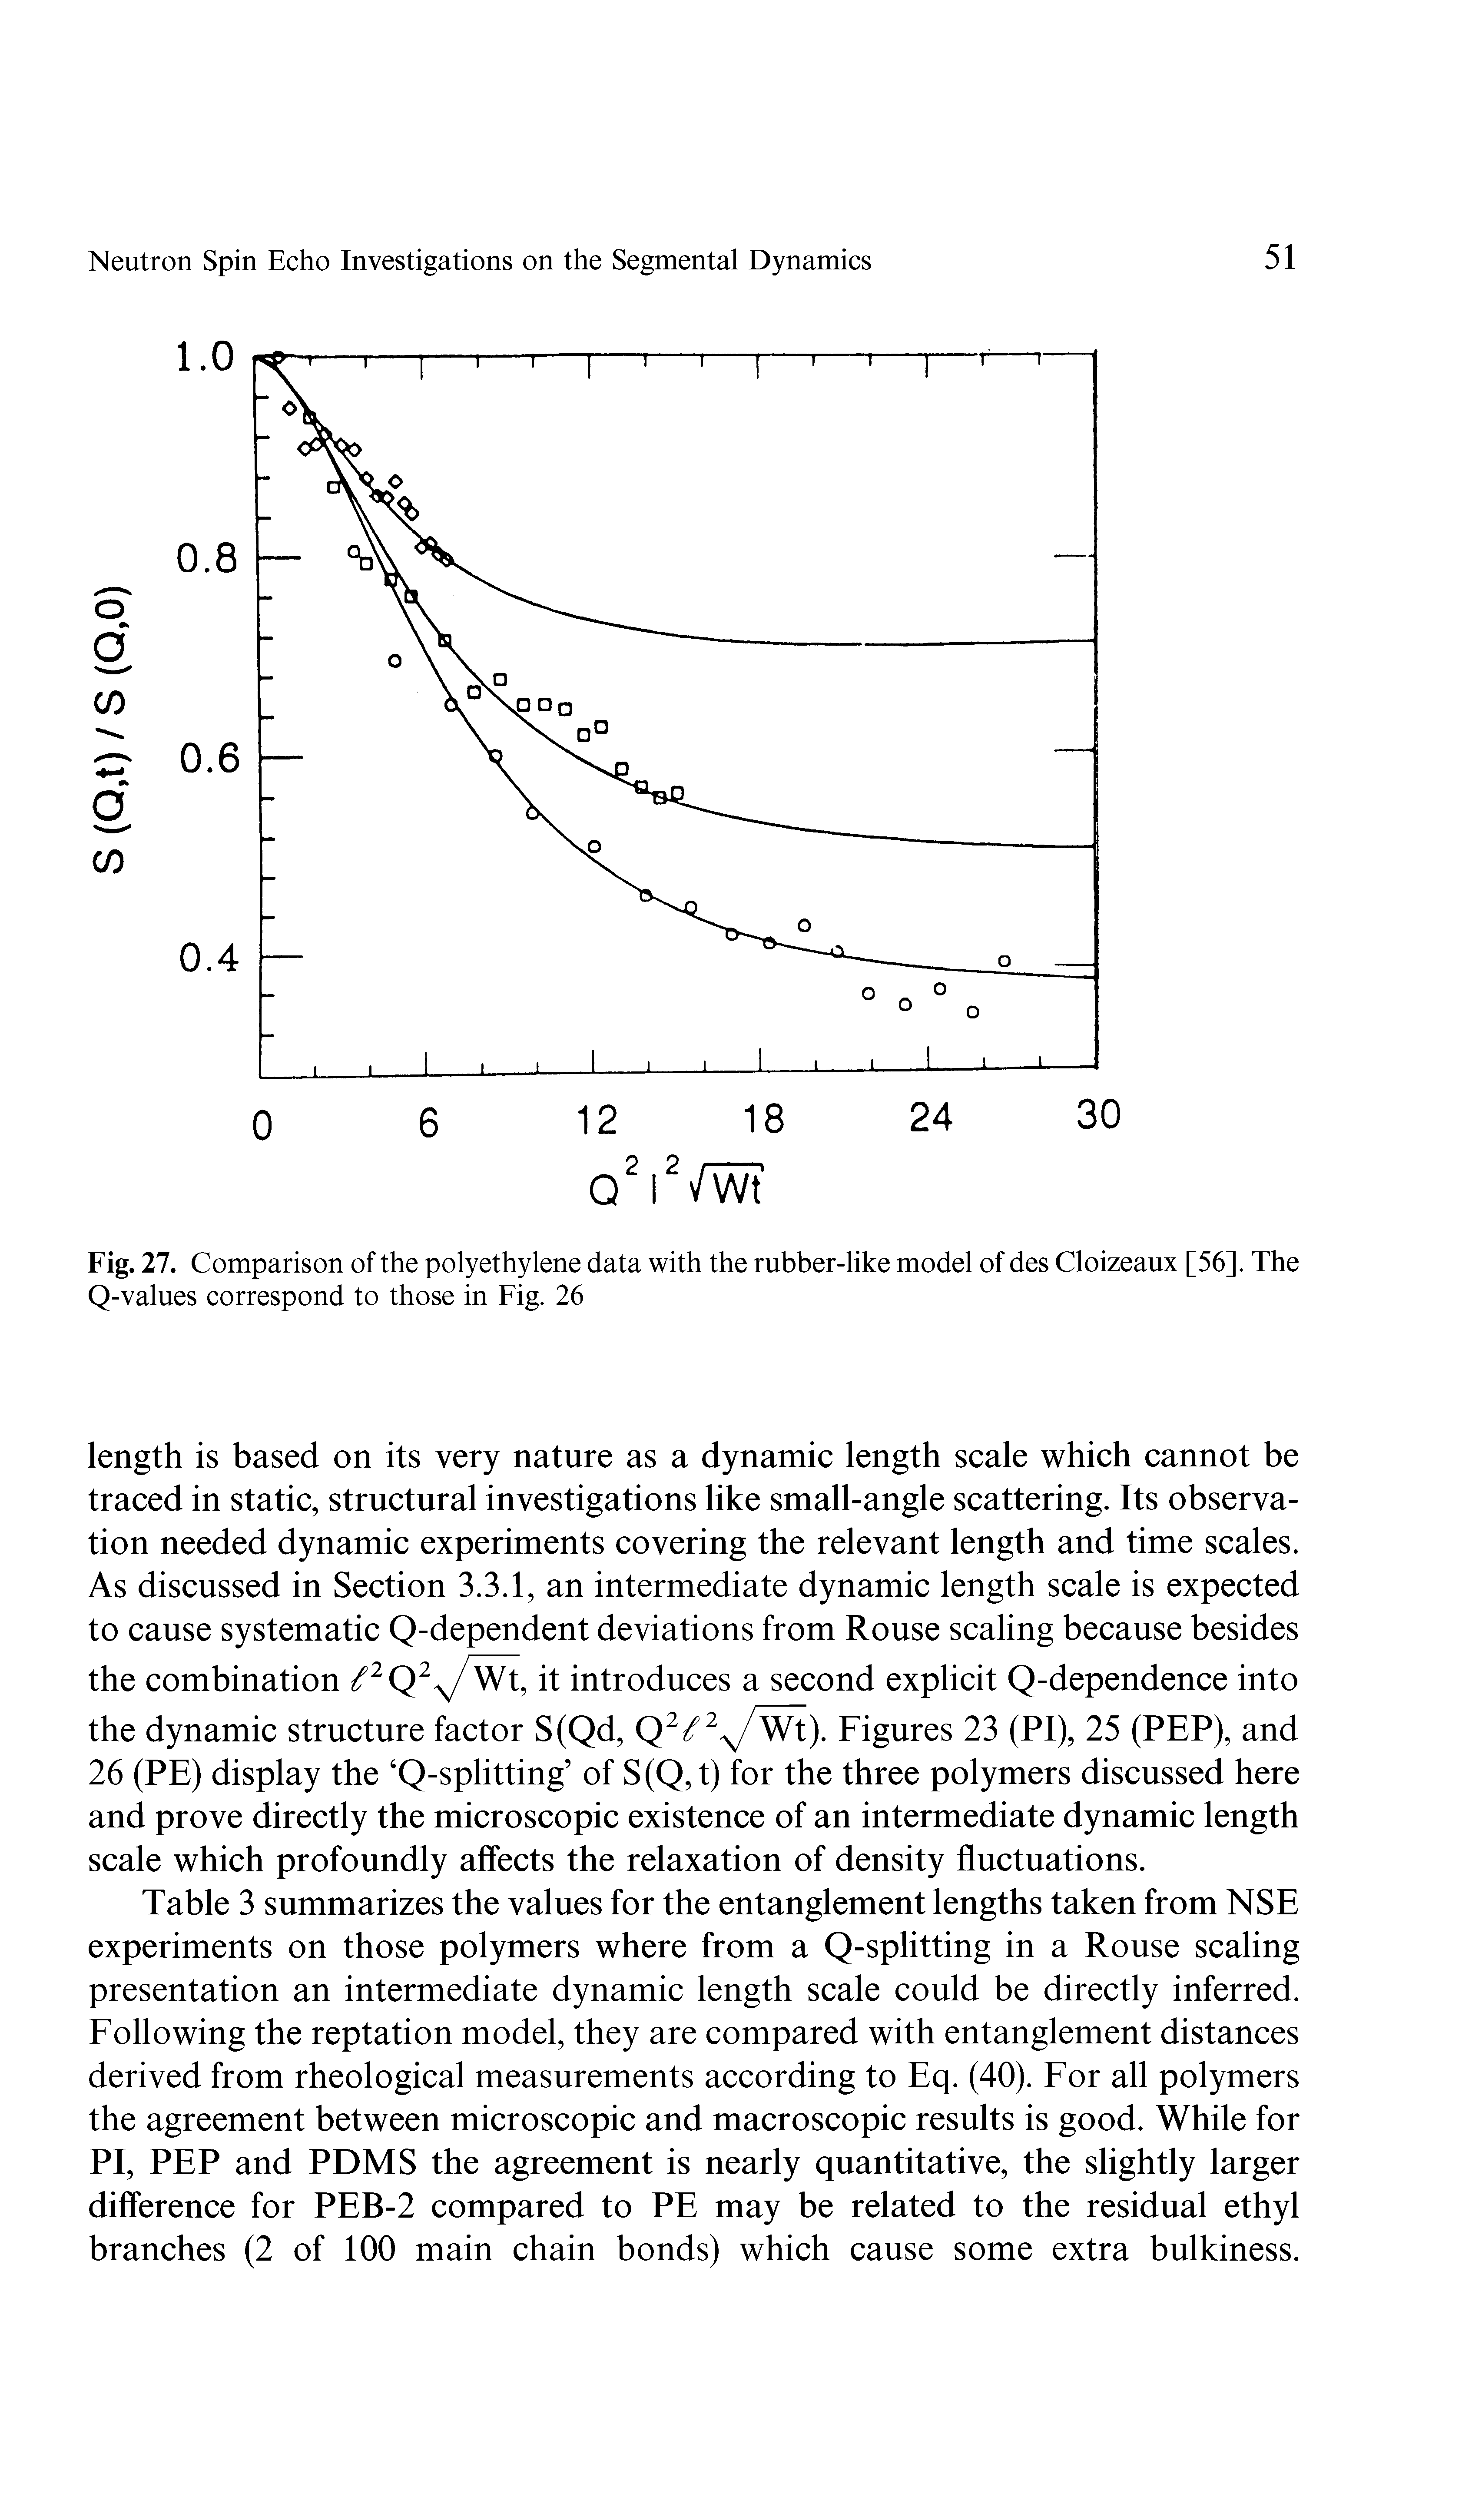 Fig. 27. Comparison of the polyethylene data with the rubber-like model of des Cloizeaux [56]. The Q-values correspond to those in Fig. 26...